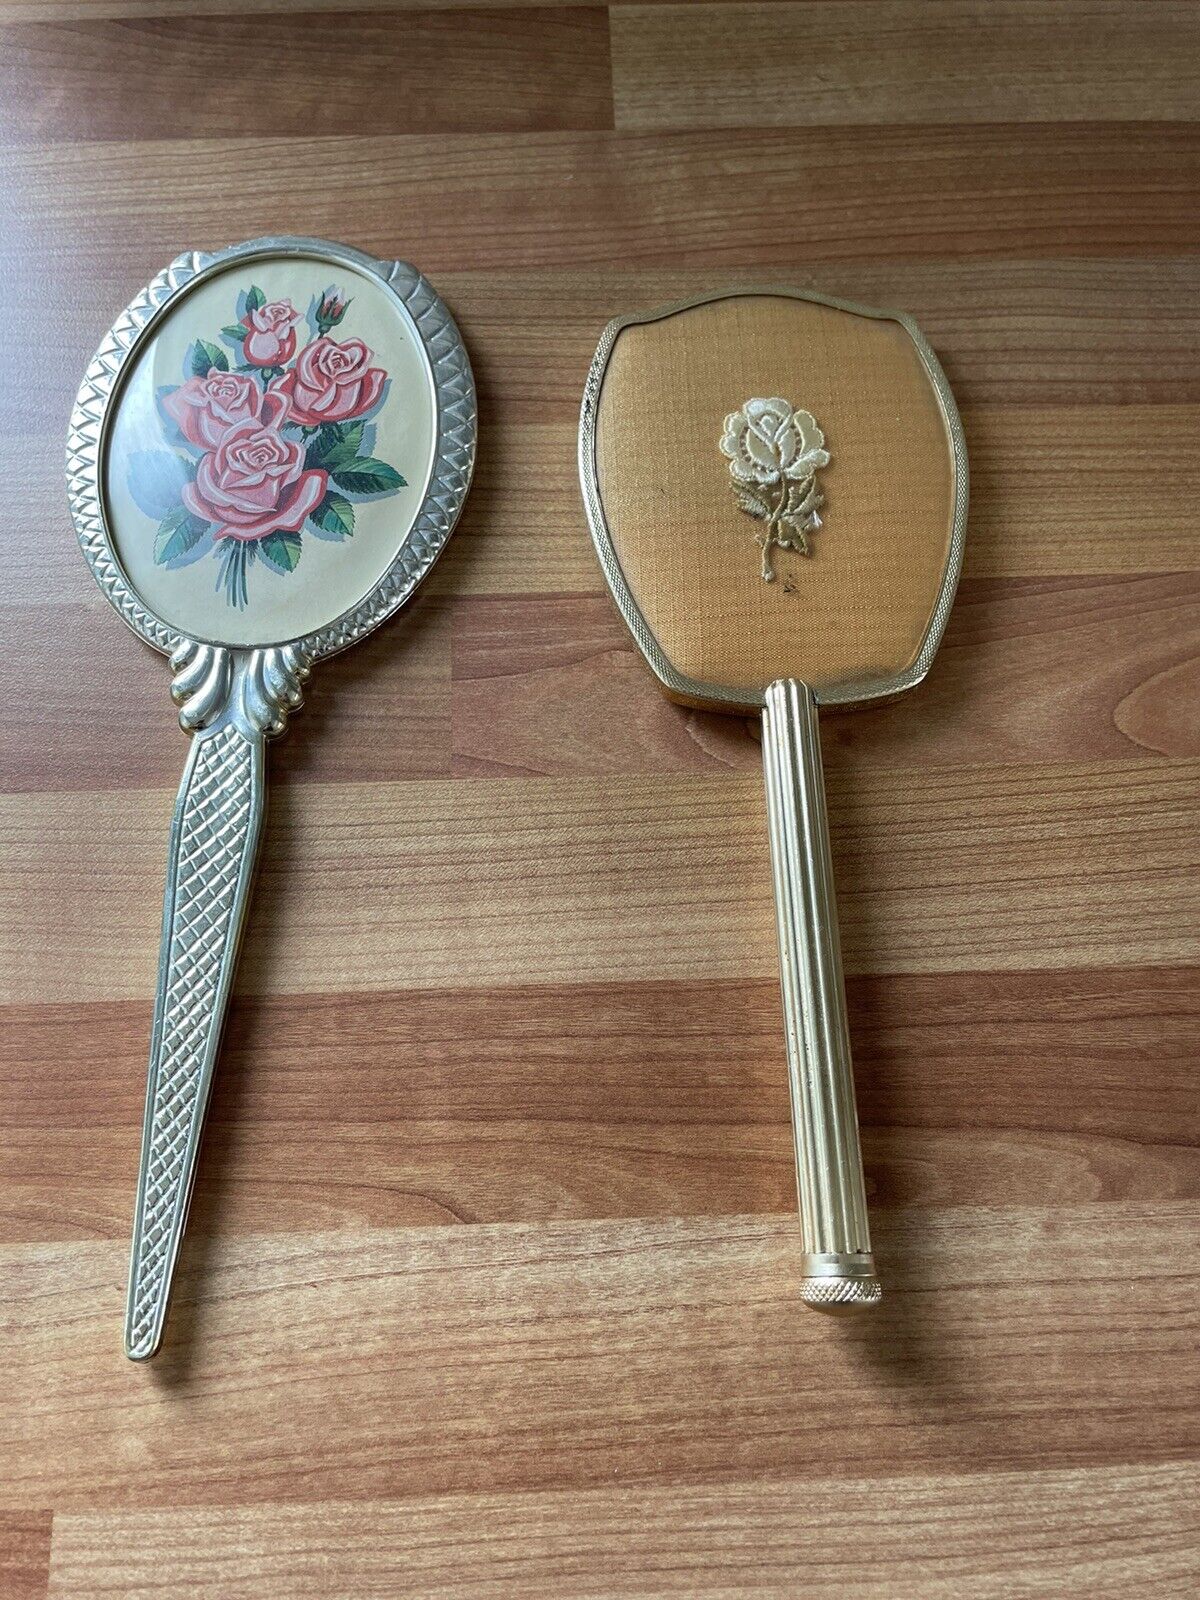 Vintage Vanity Dressing Table 2x mirrors made In England/Embroidery Collectable